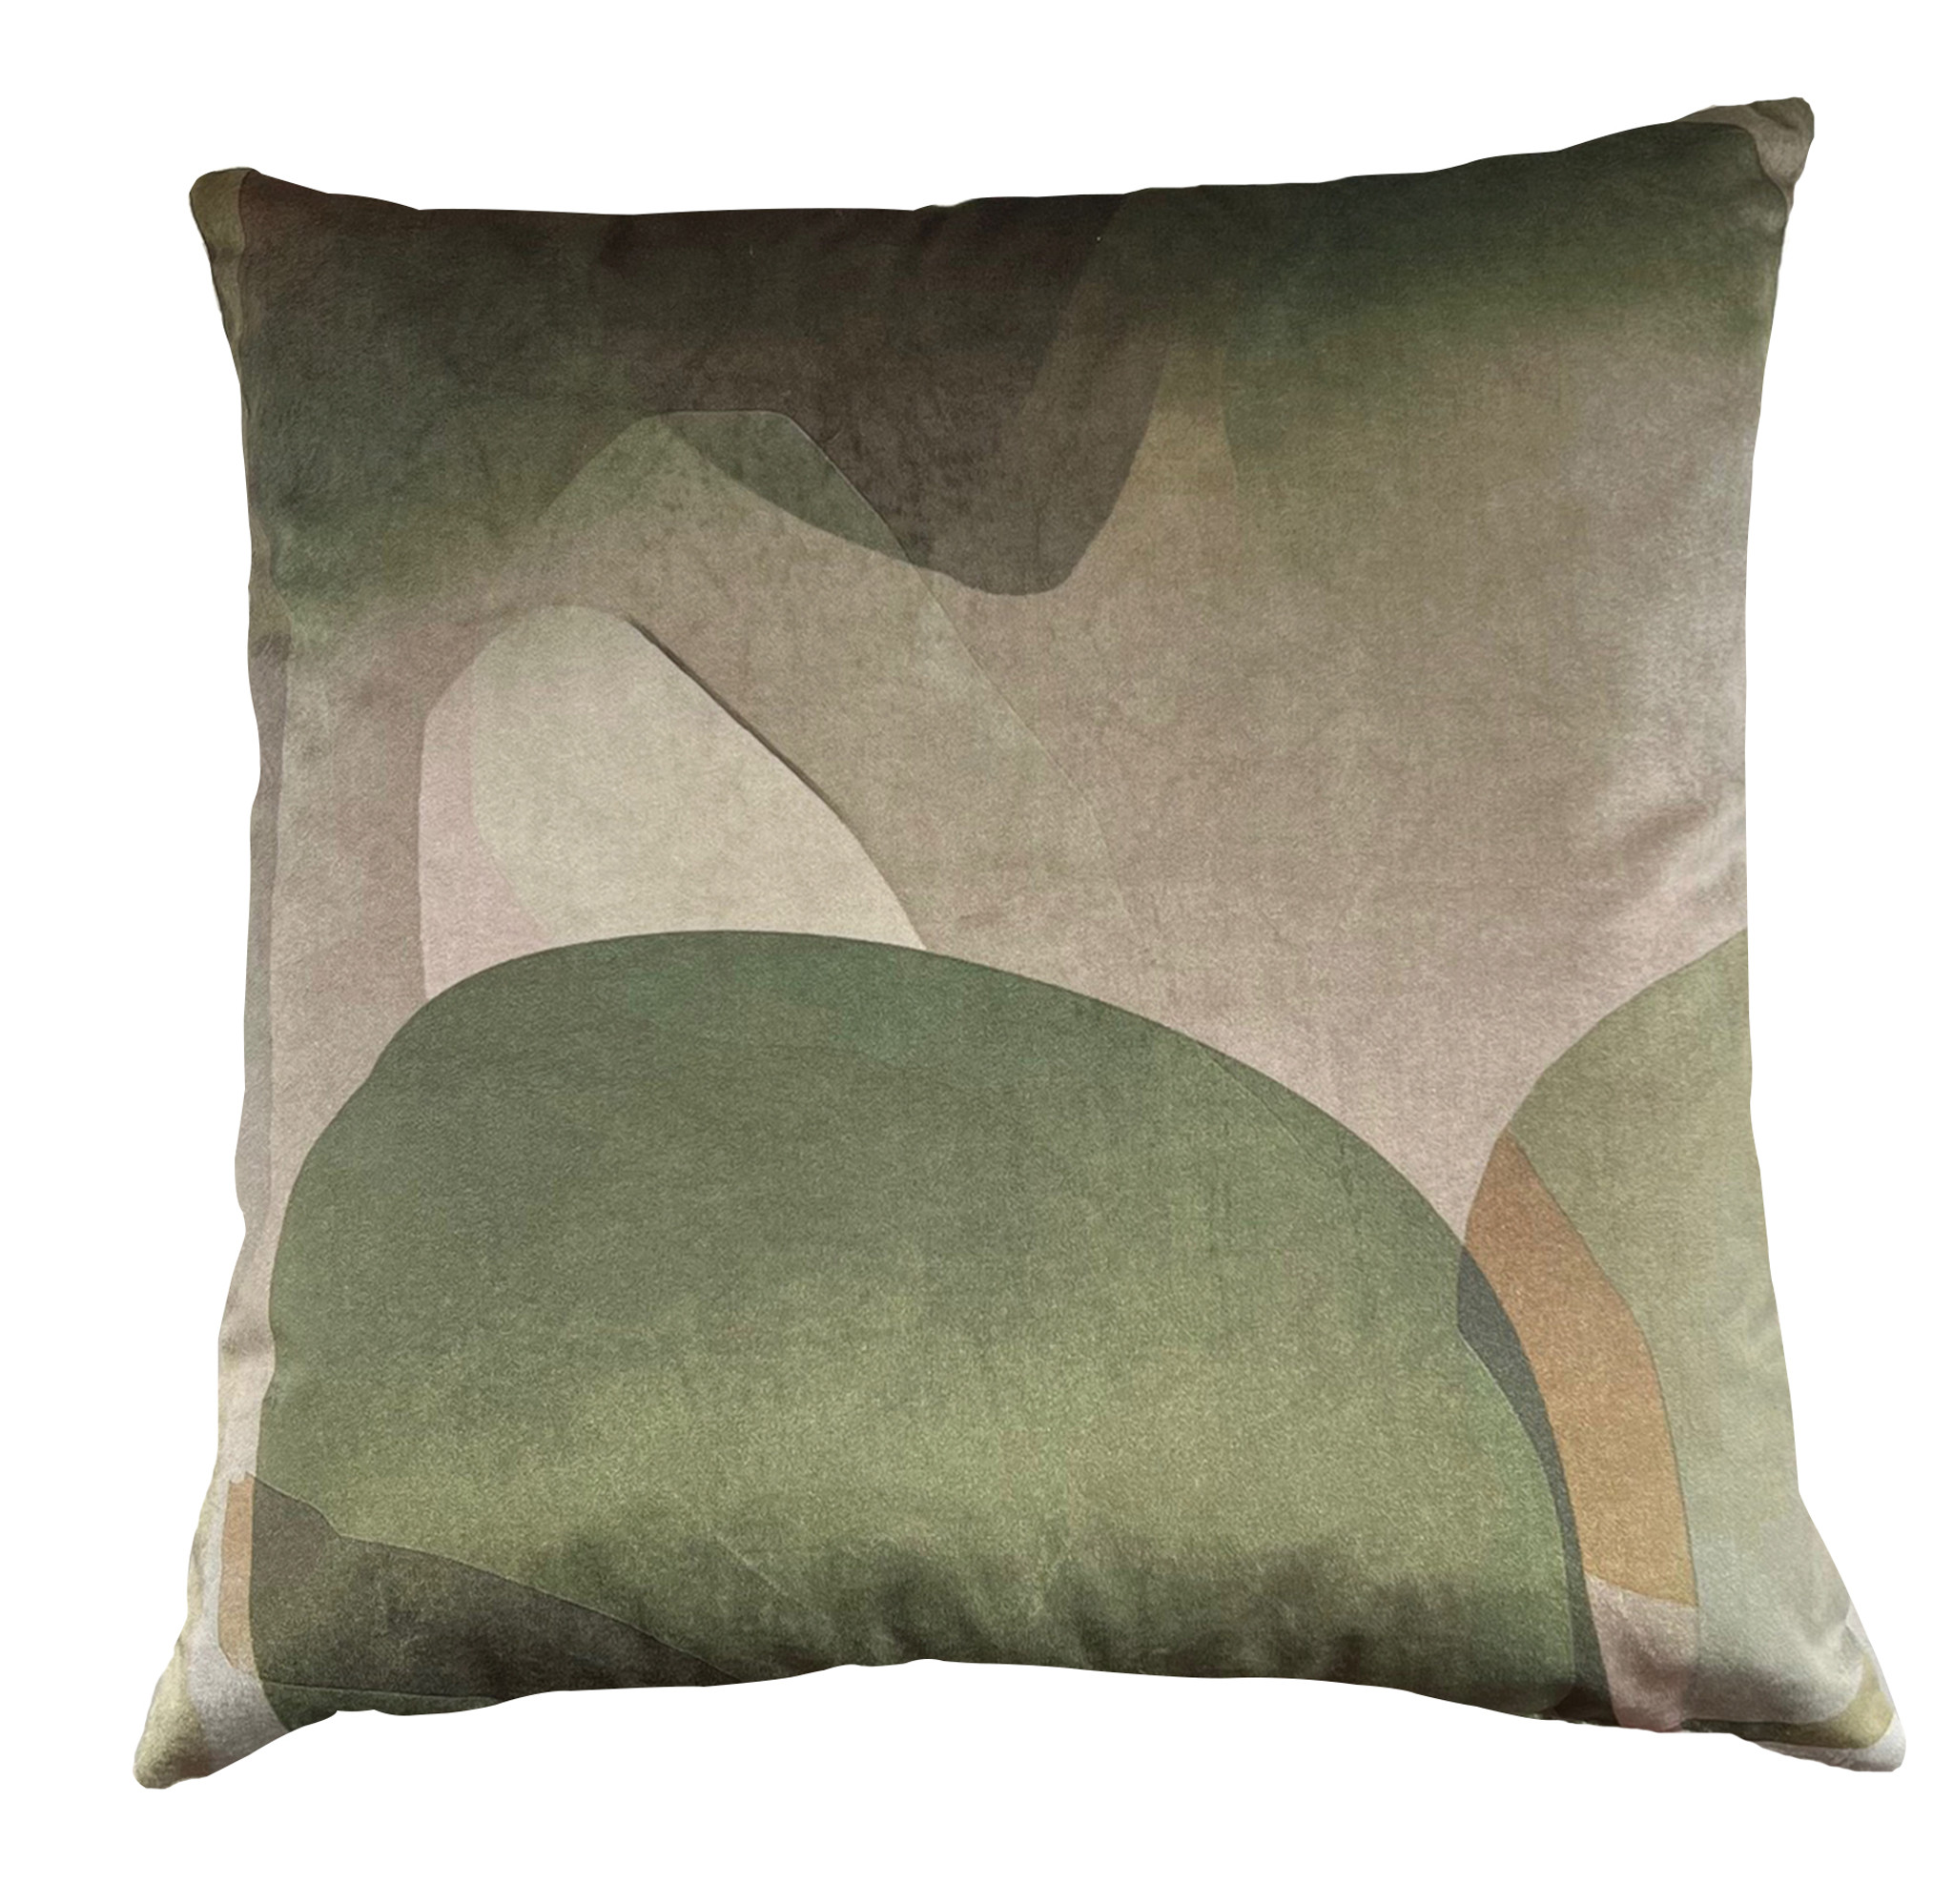 Cushion Cover - Musical Interlude in Olive